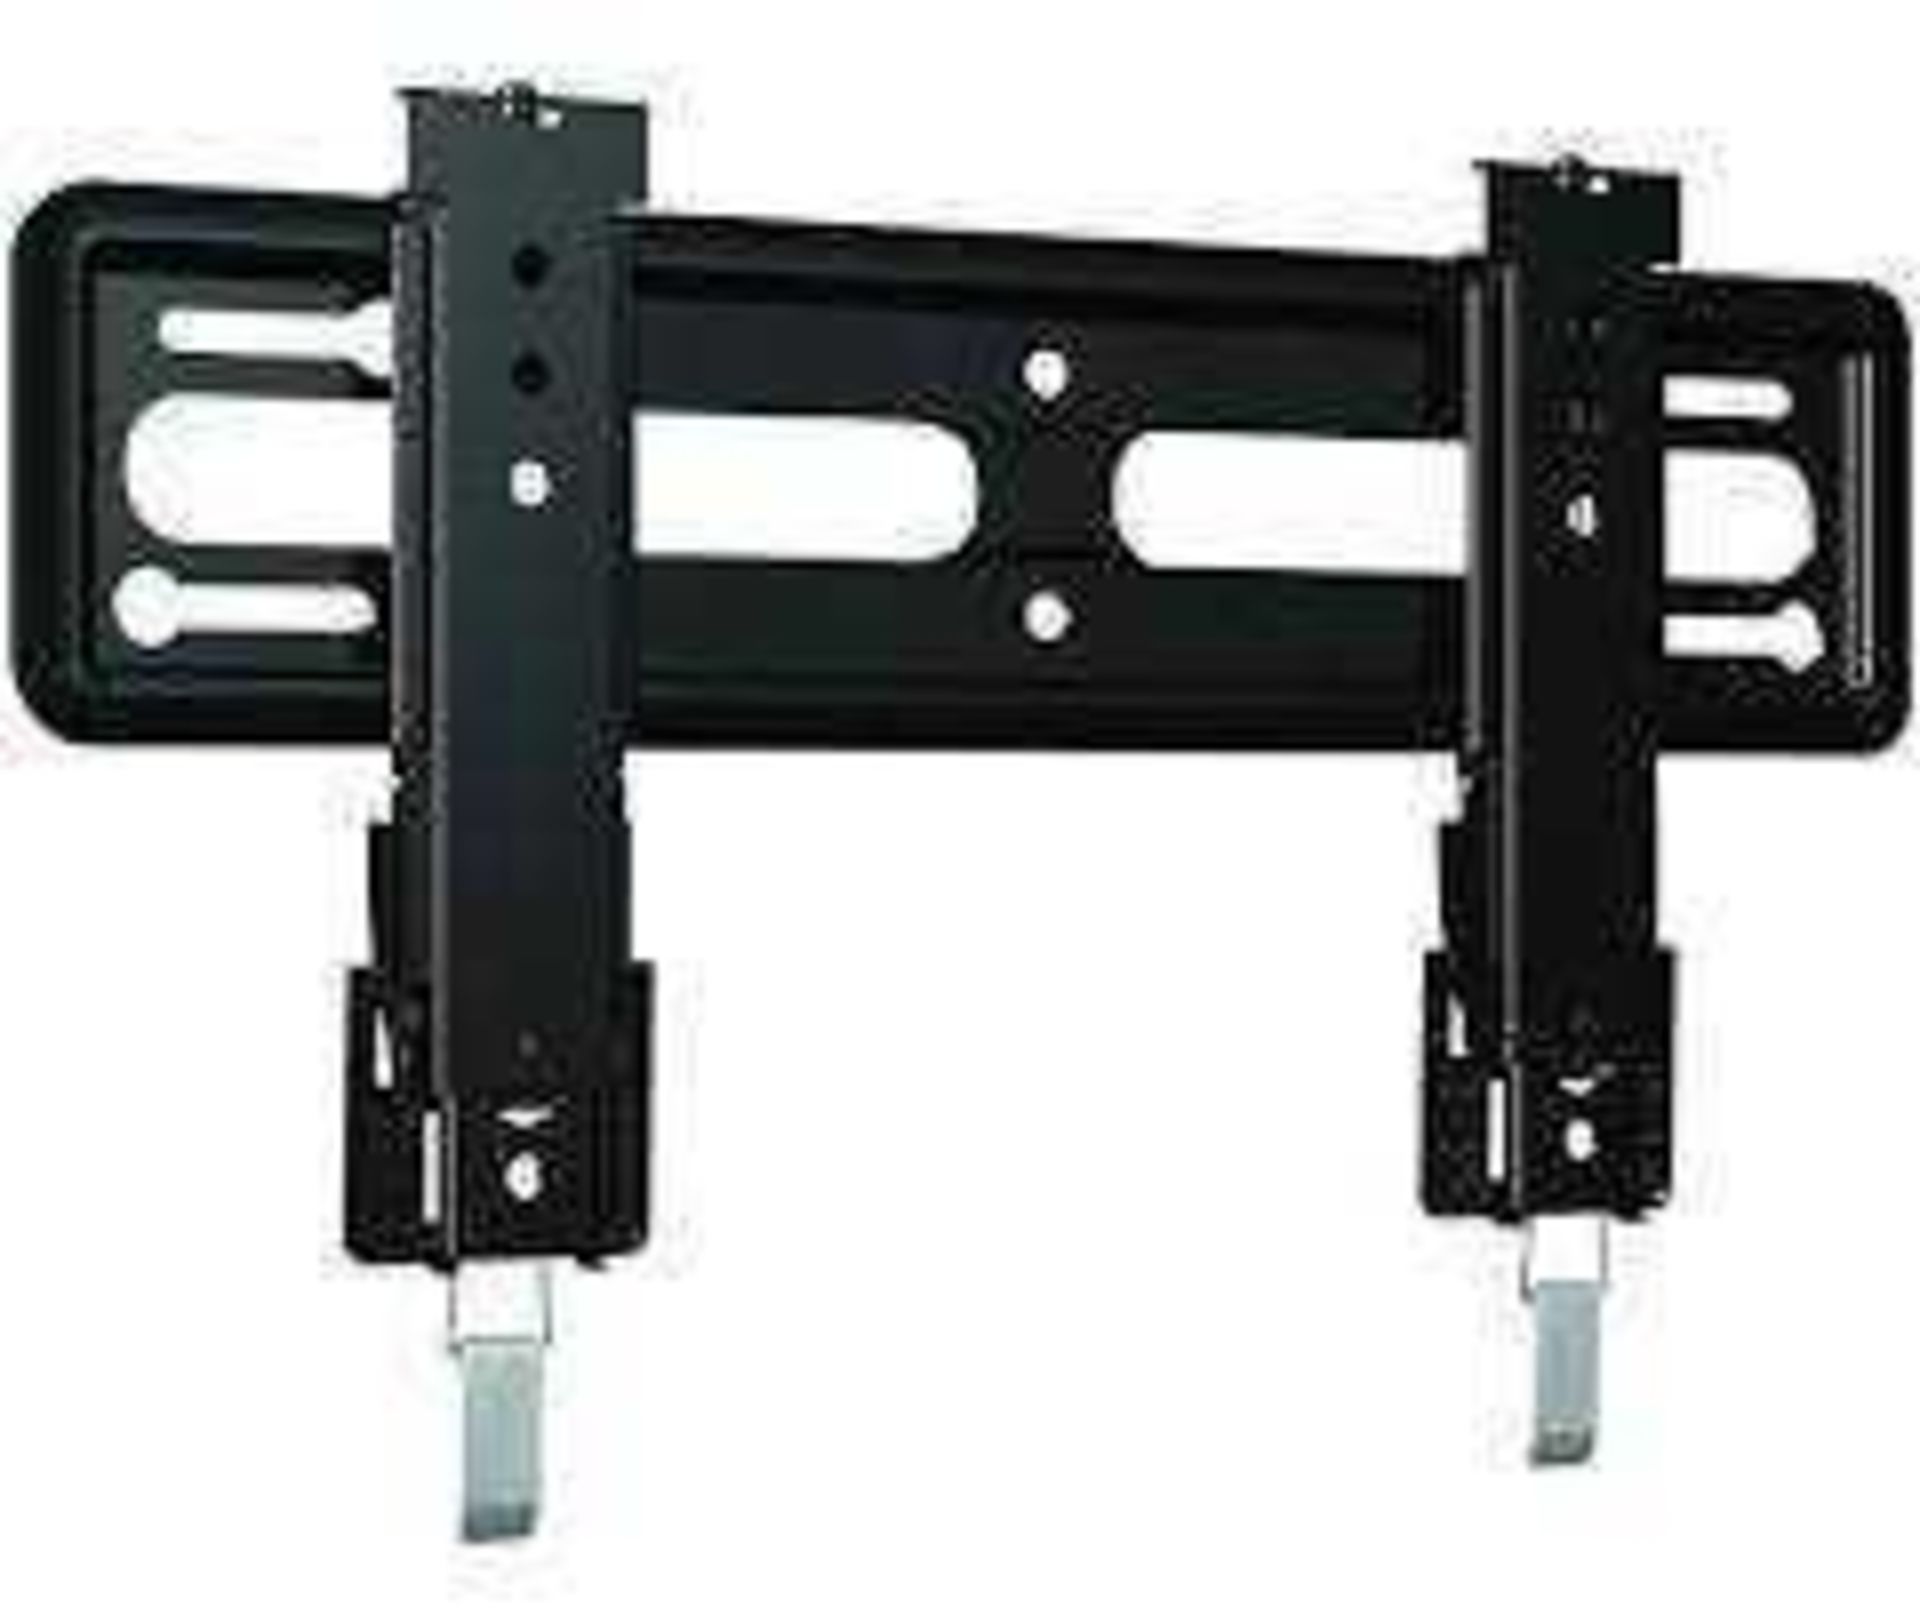 Combined RRP £140 Lot To Contain 2 Boxed Sanus Wall Mounts, Including Model Vll5-B2 Fixed 42-90 Inch